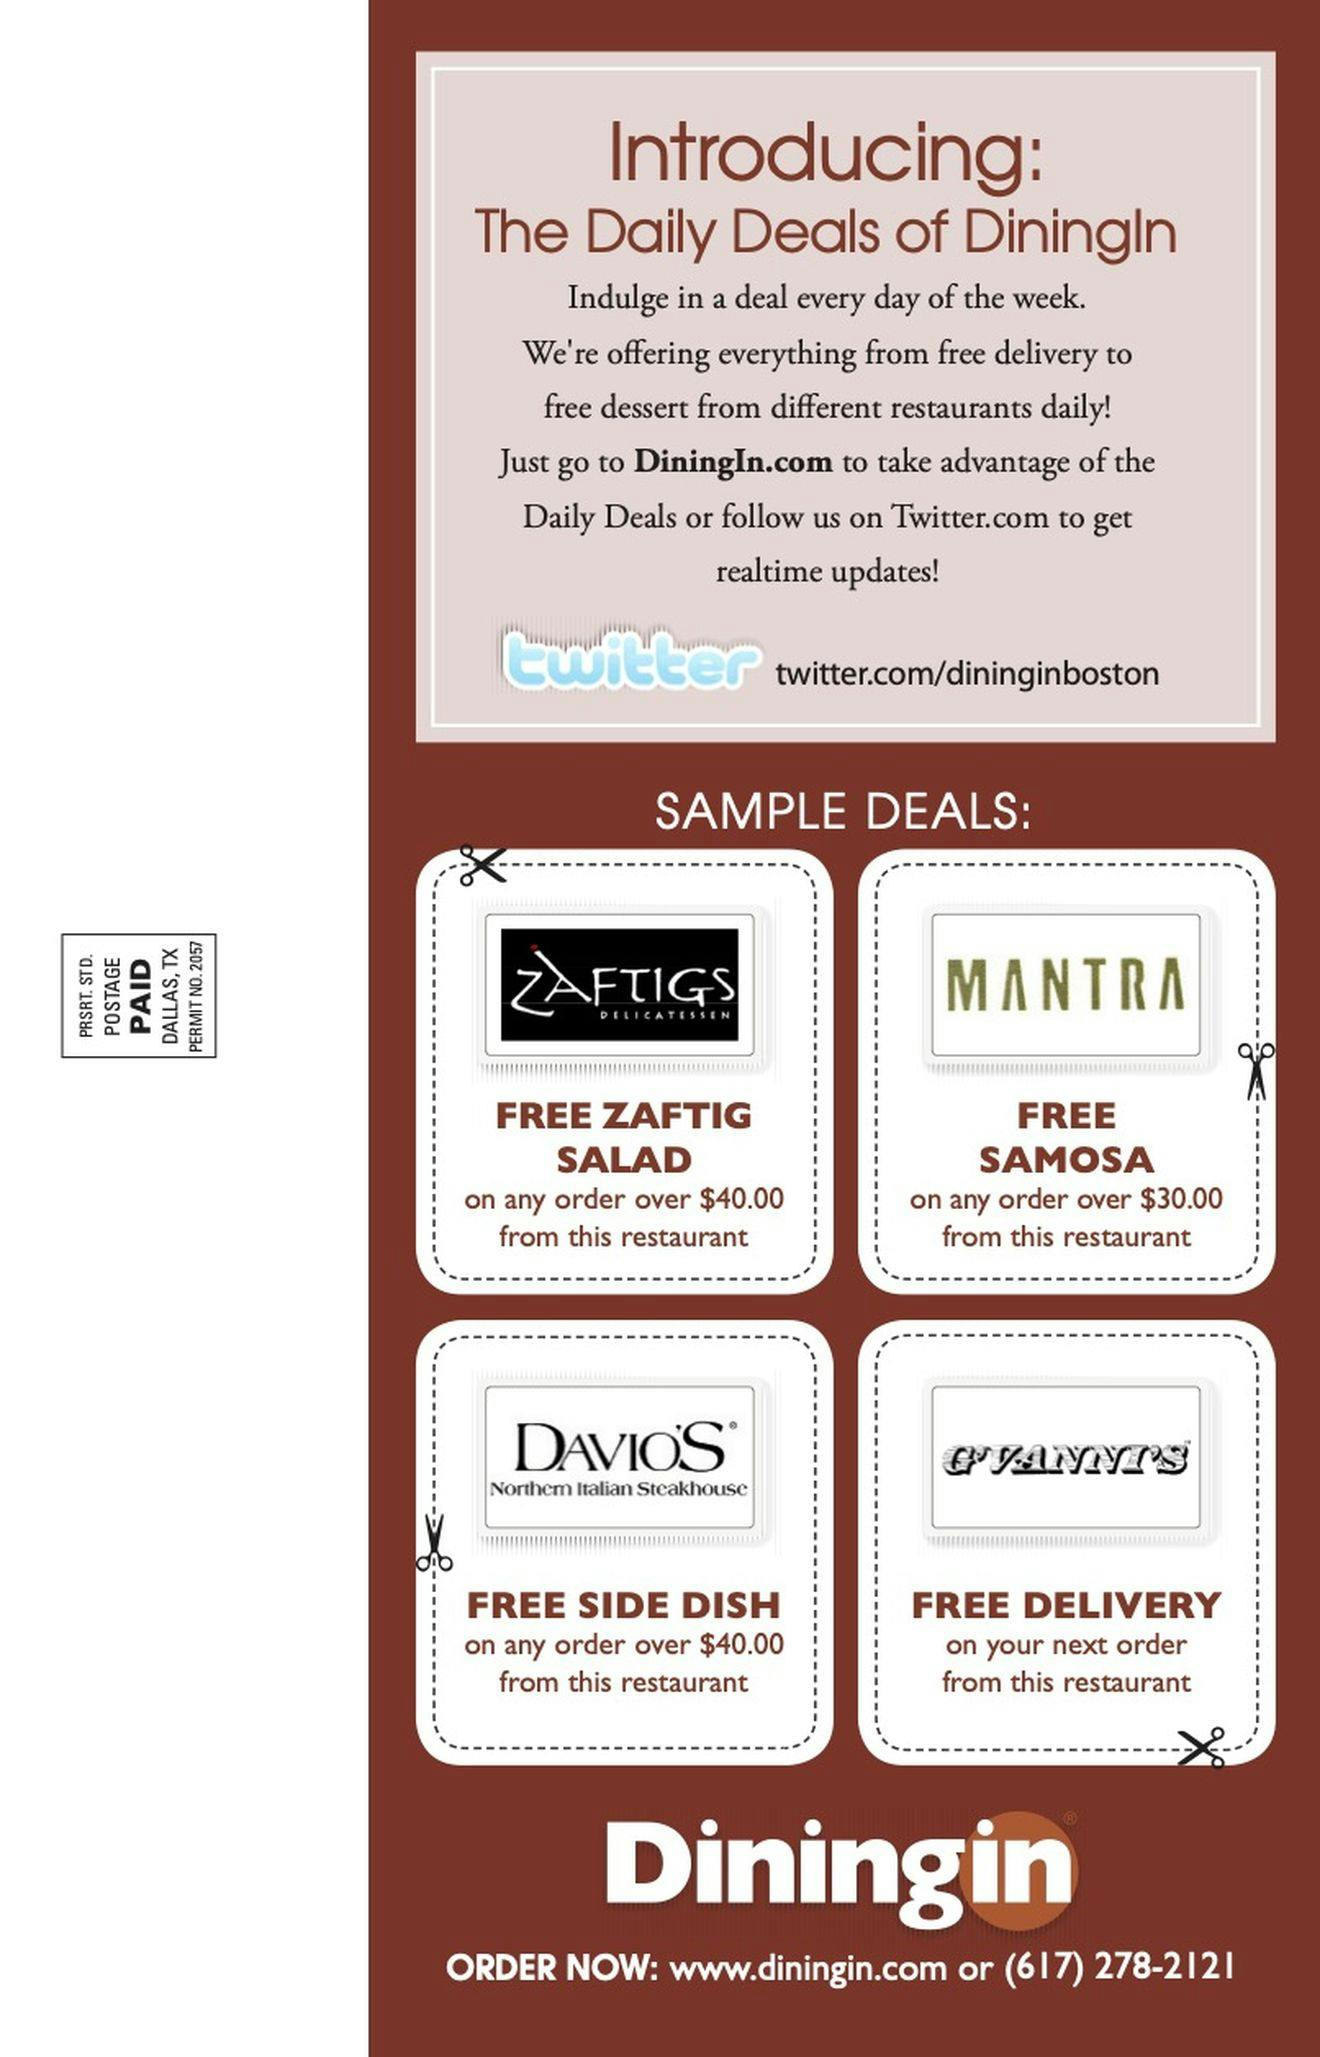 Back cover of the mailer, a great opportunity to feature deals and the latest DiningIn news